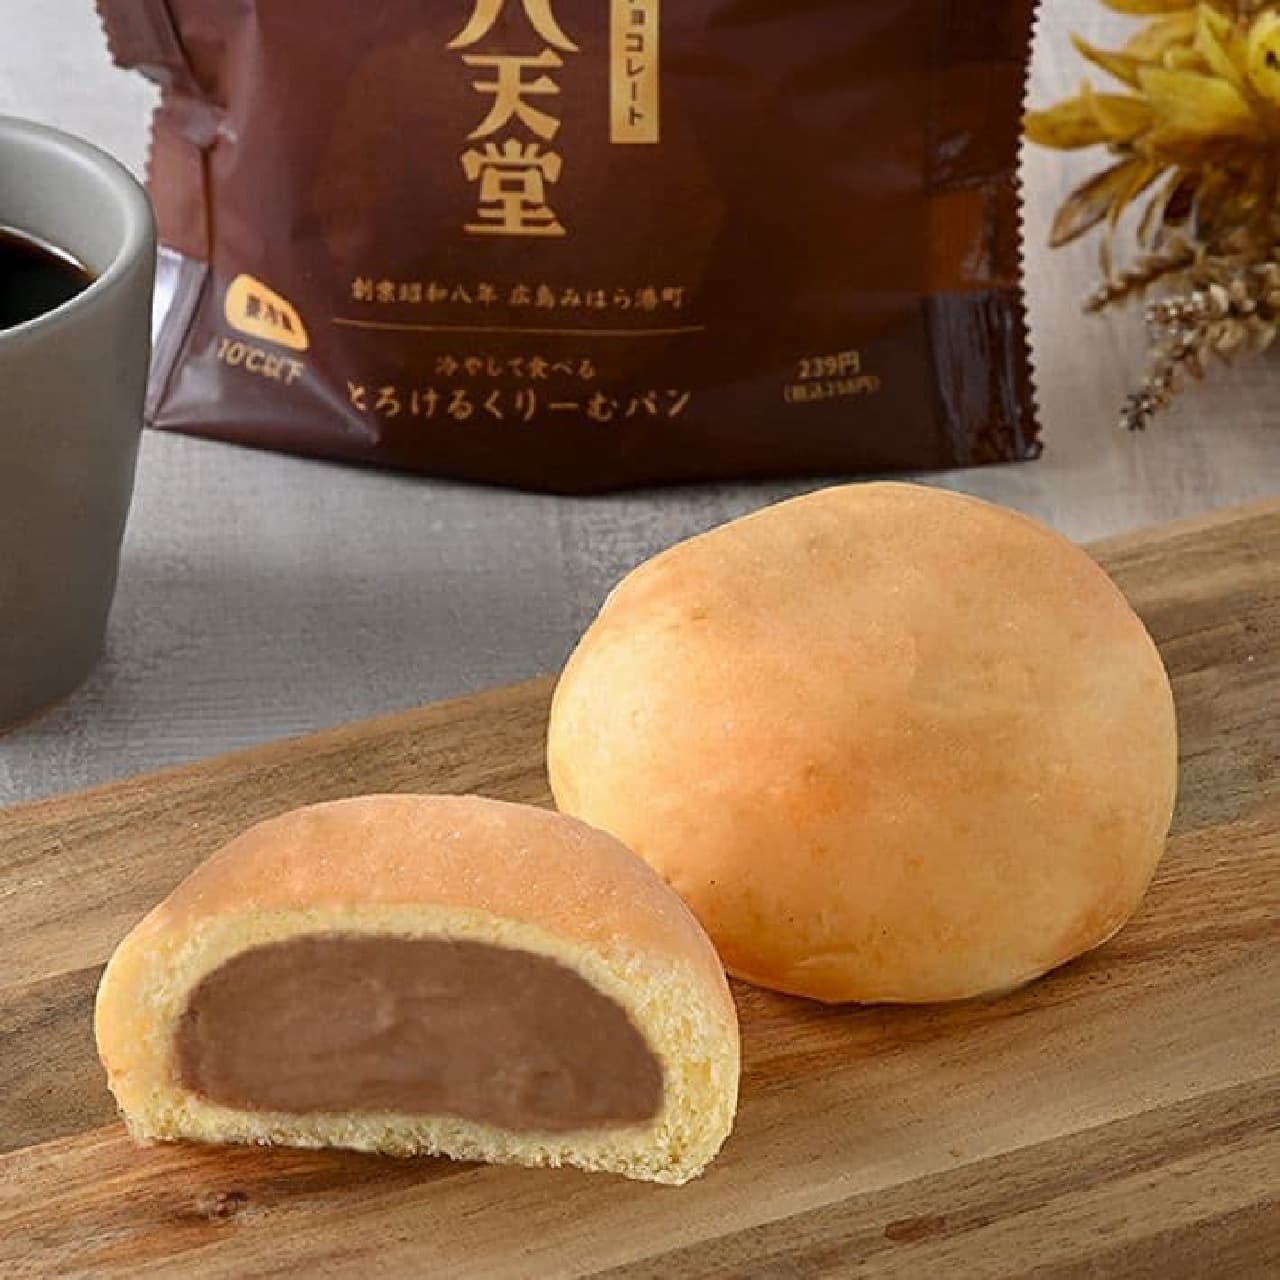 FamilyMart "Chilled Melted Creamy Buns Chocolate